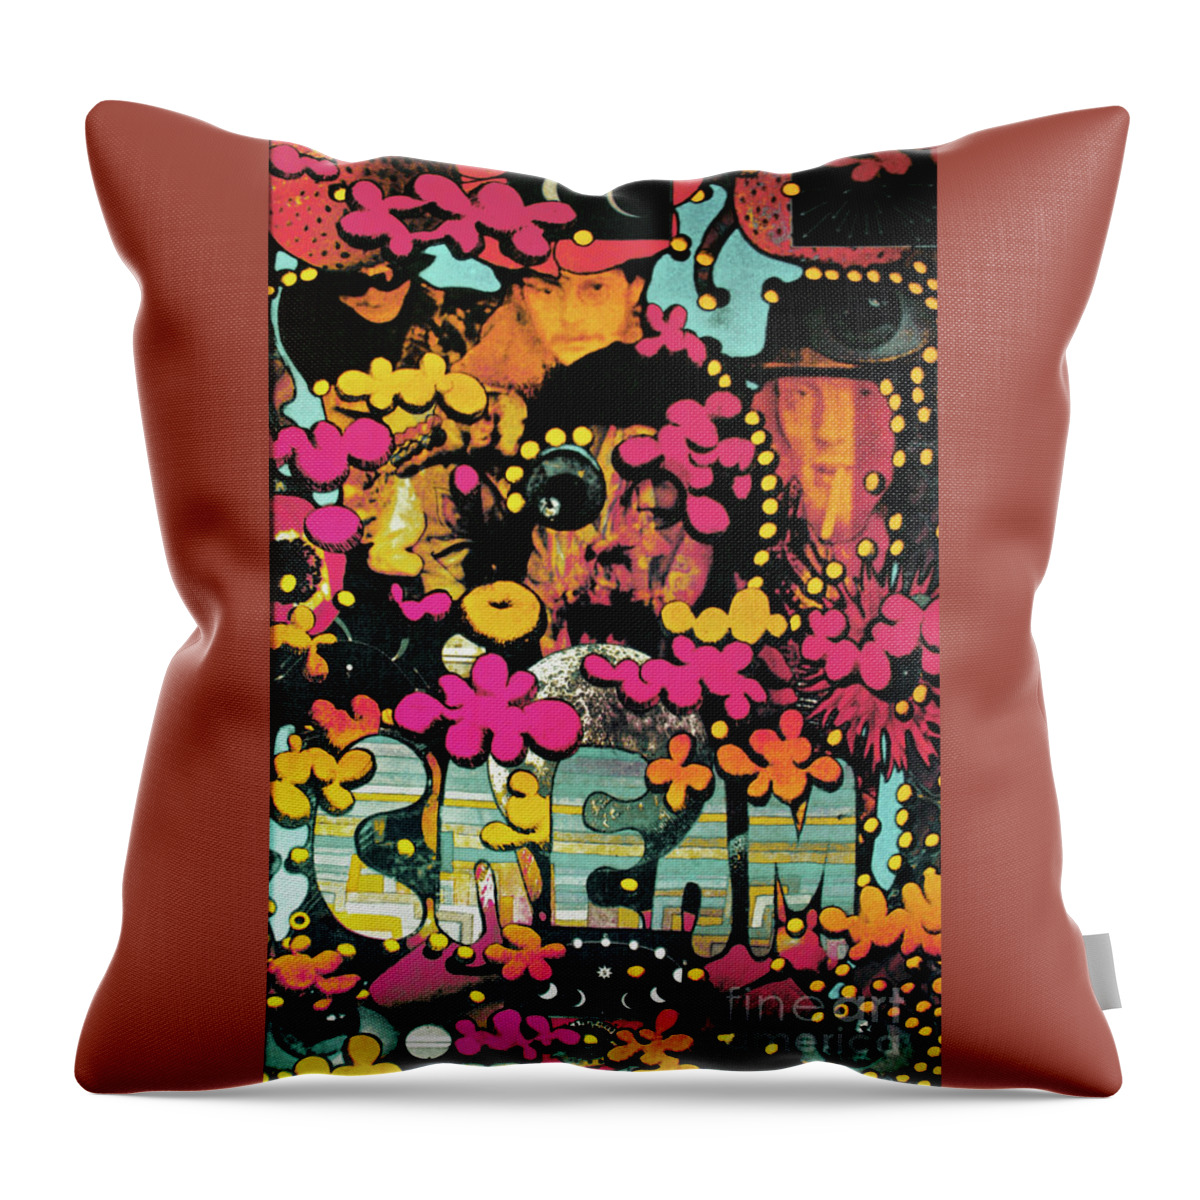 Cream Throw Pillow featuring the photograph Cream concert poster by Cream